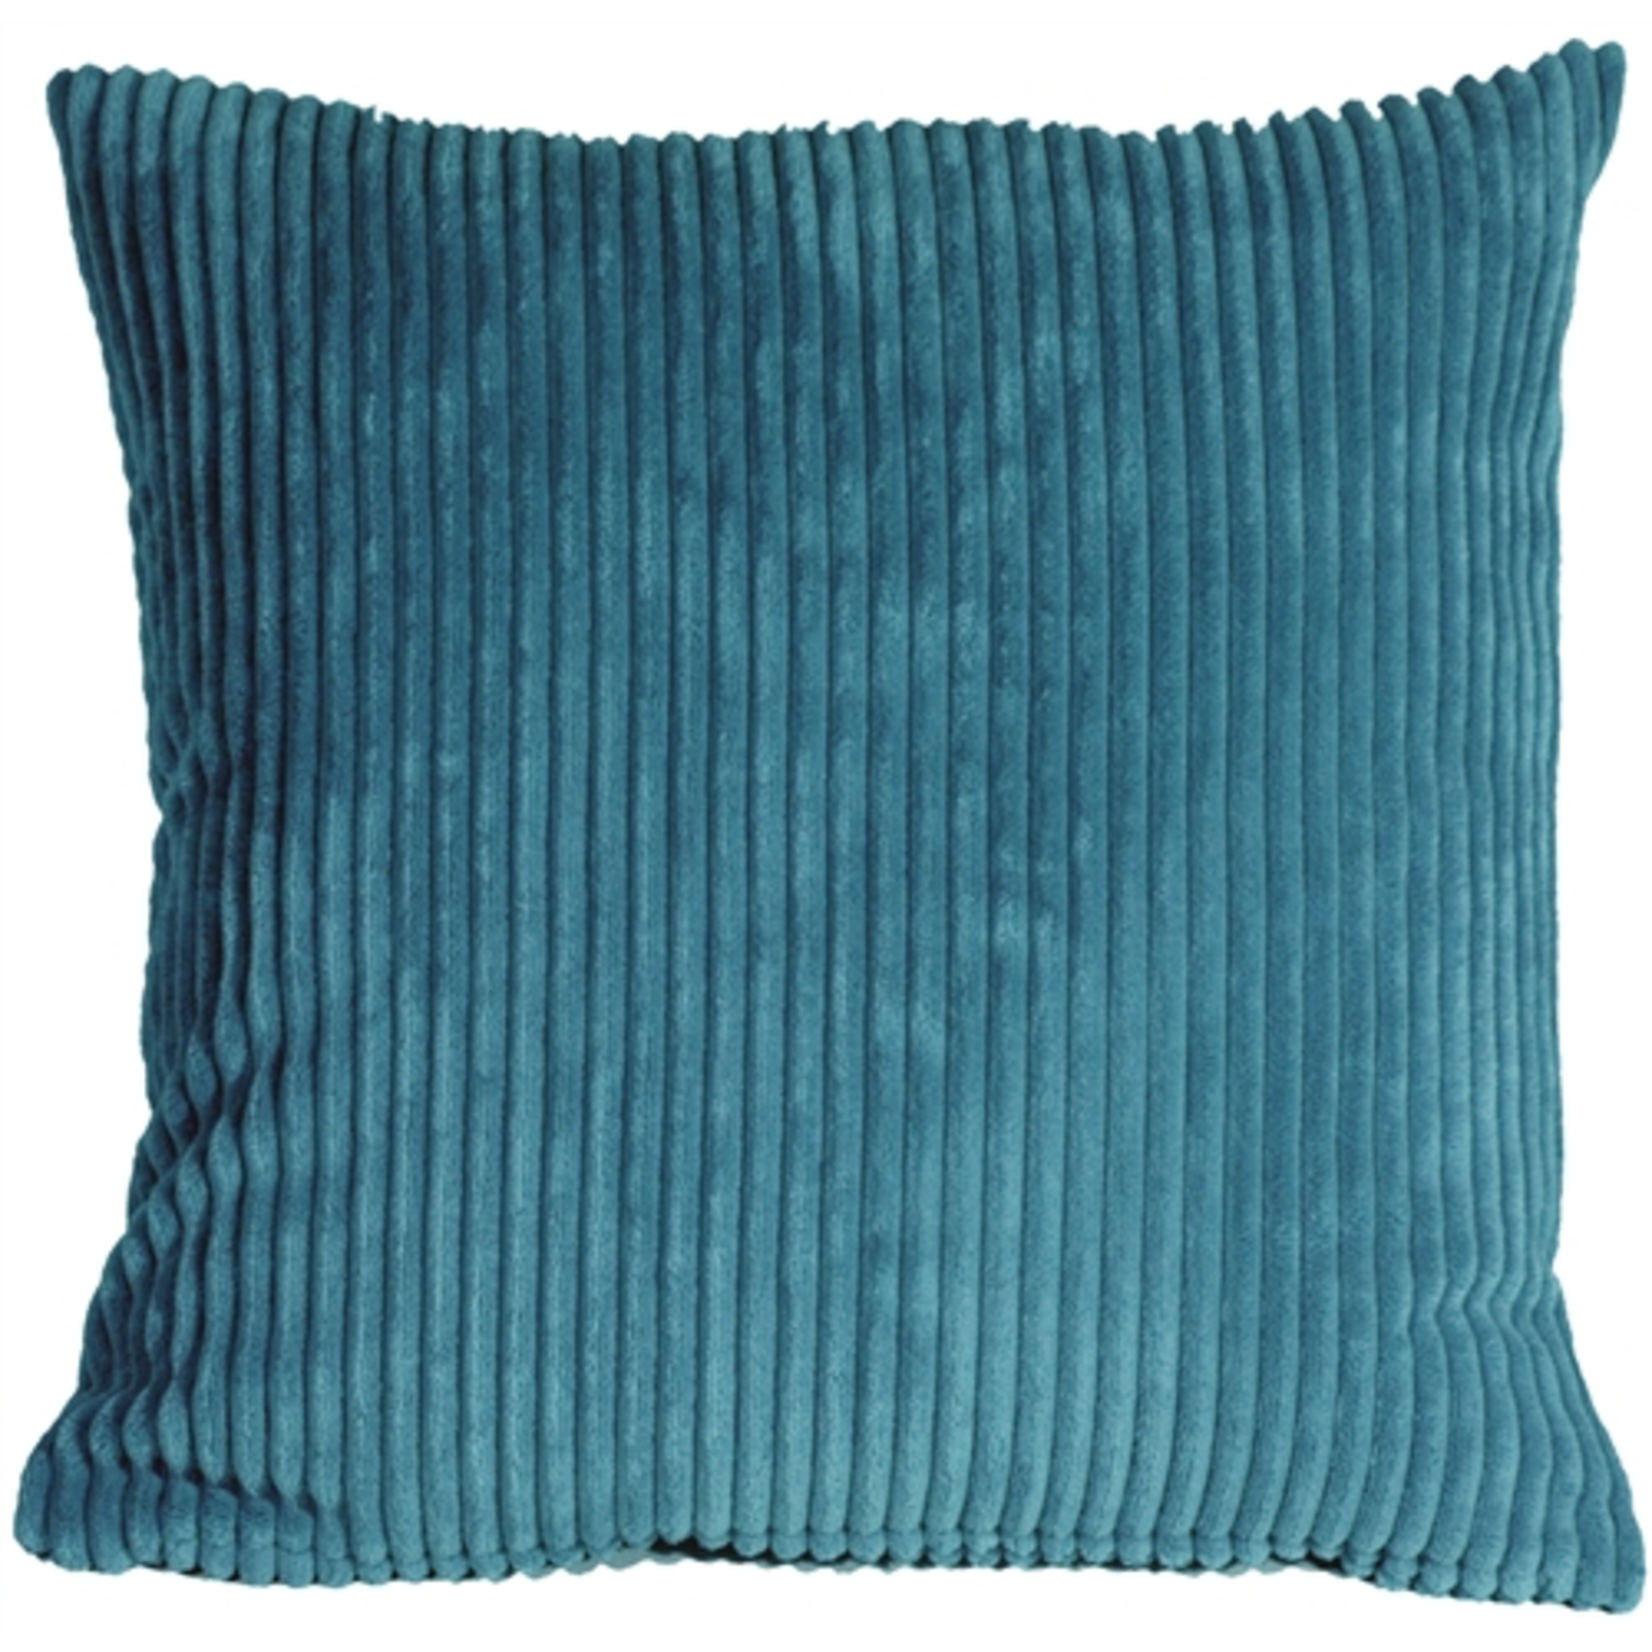 Corduroy Marine Blue 18X18 Cushion with Feather Filler